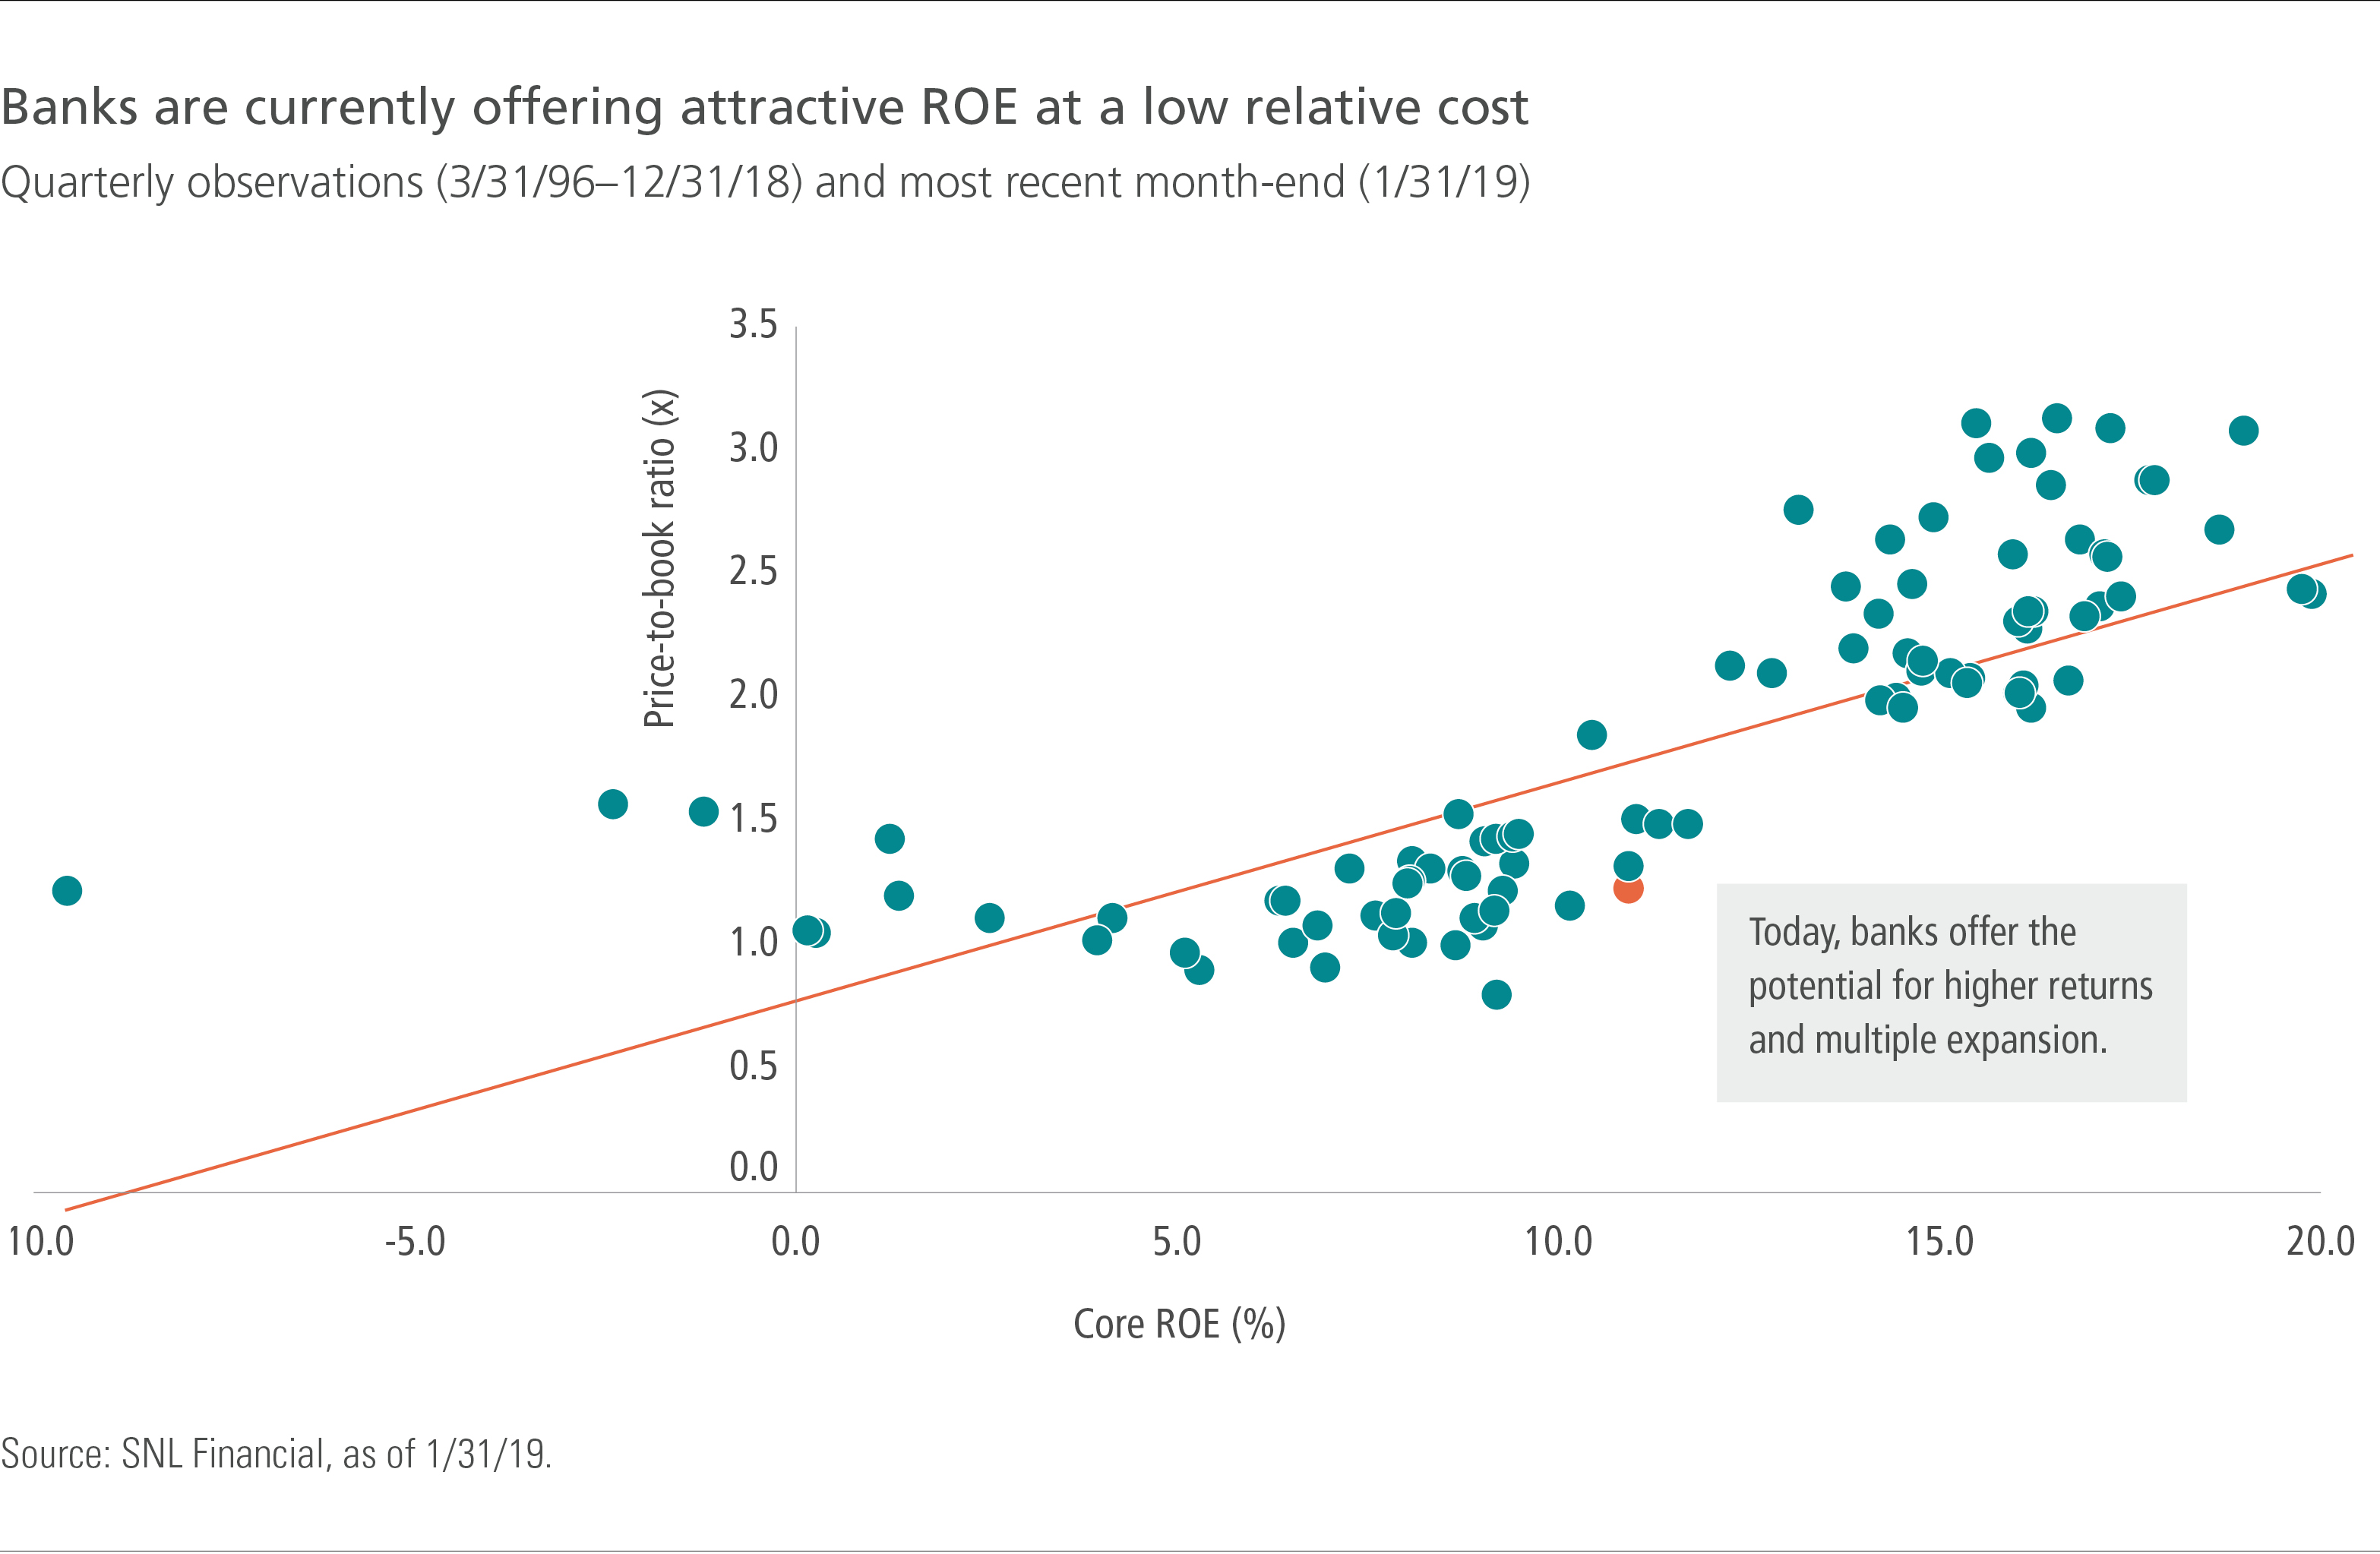 Banks are offering attractive ROE at a low relative cost